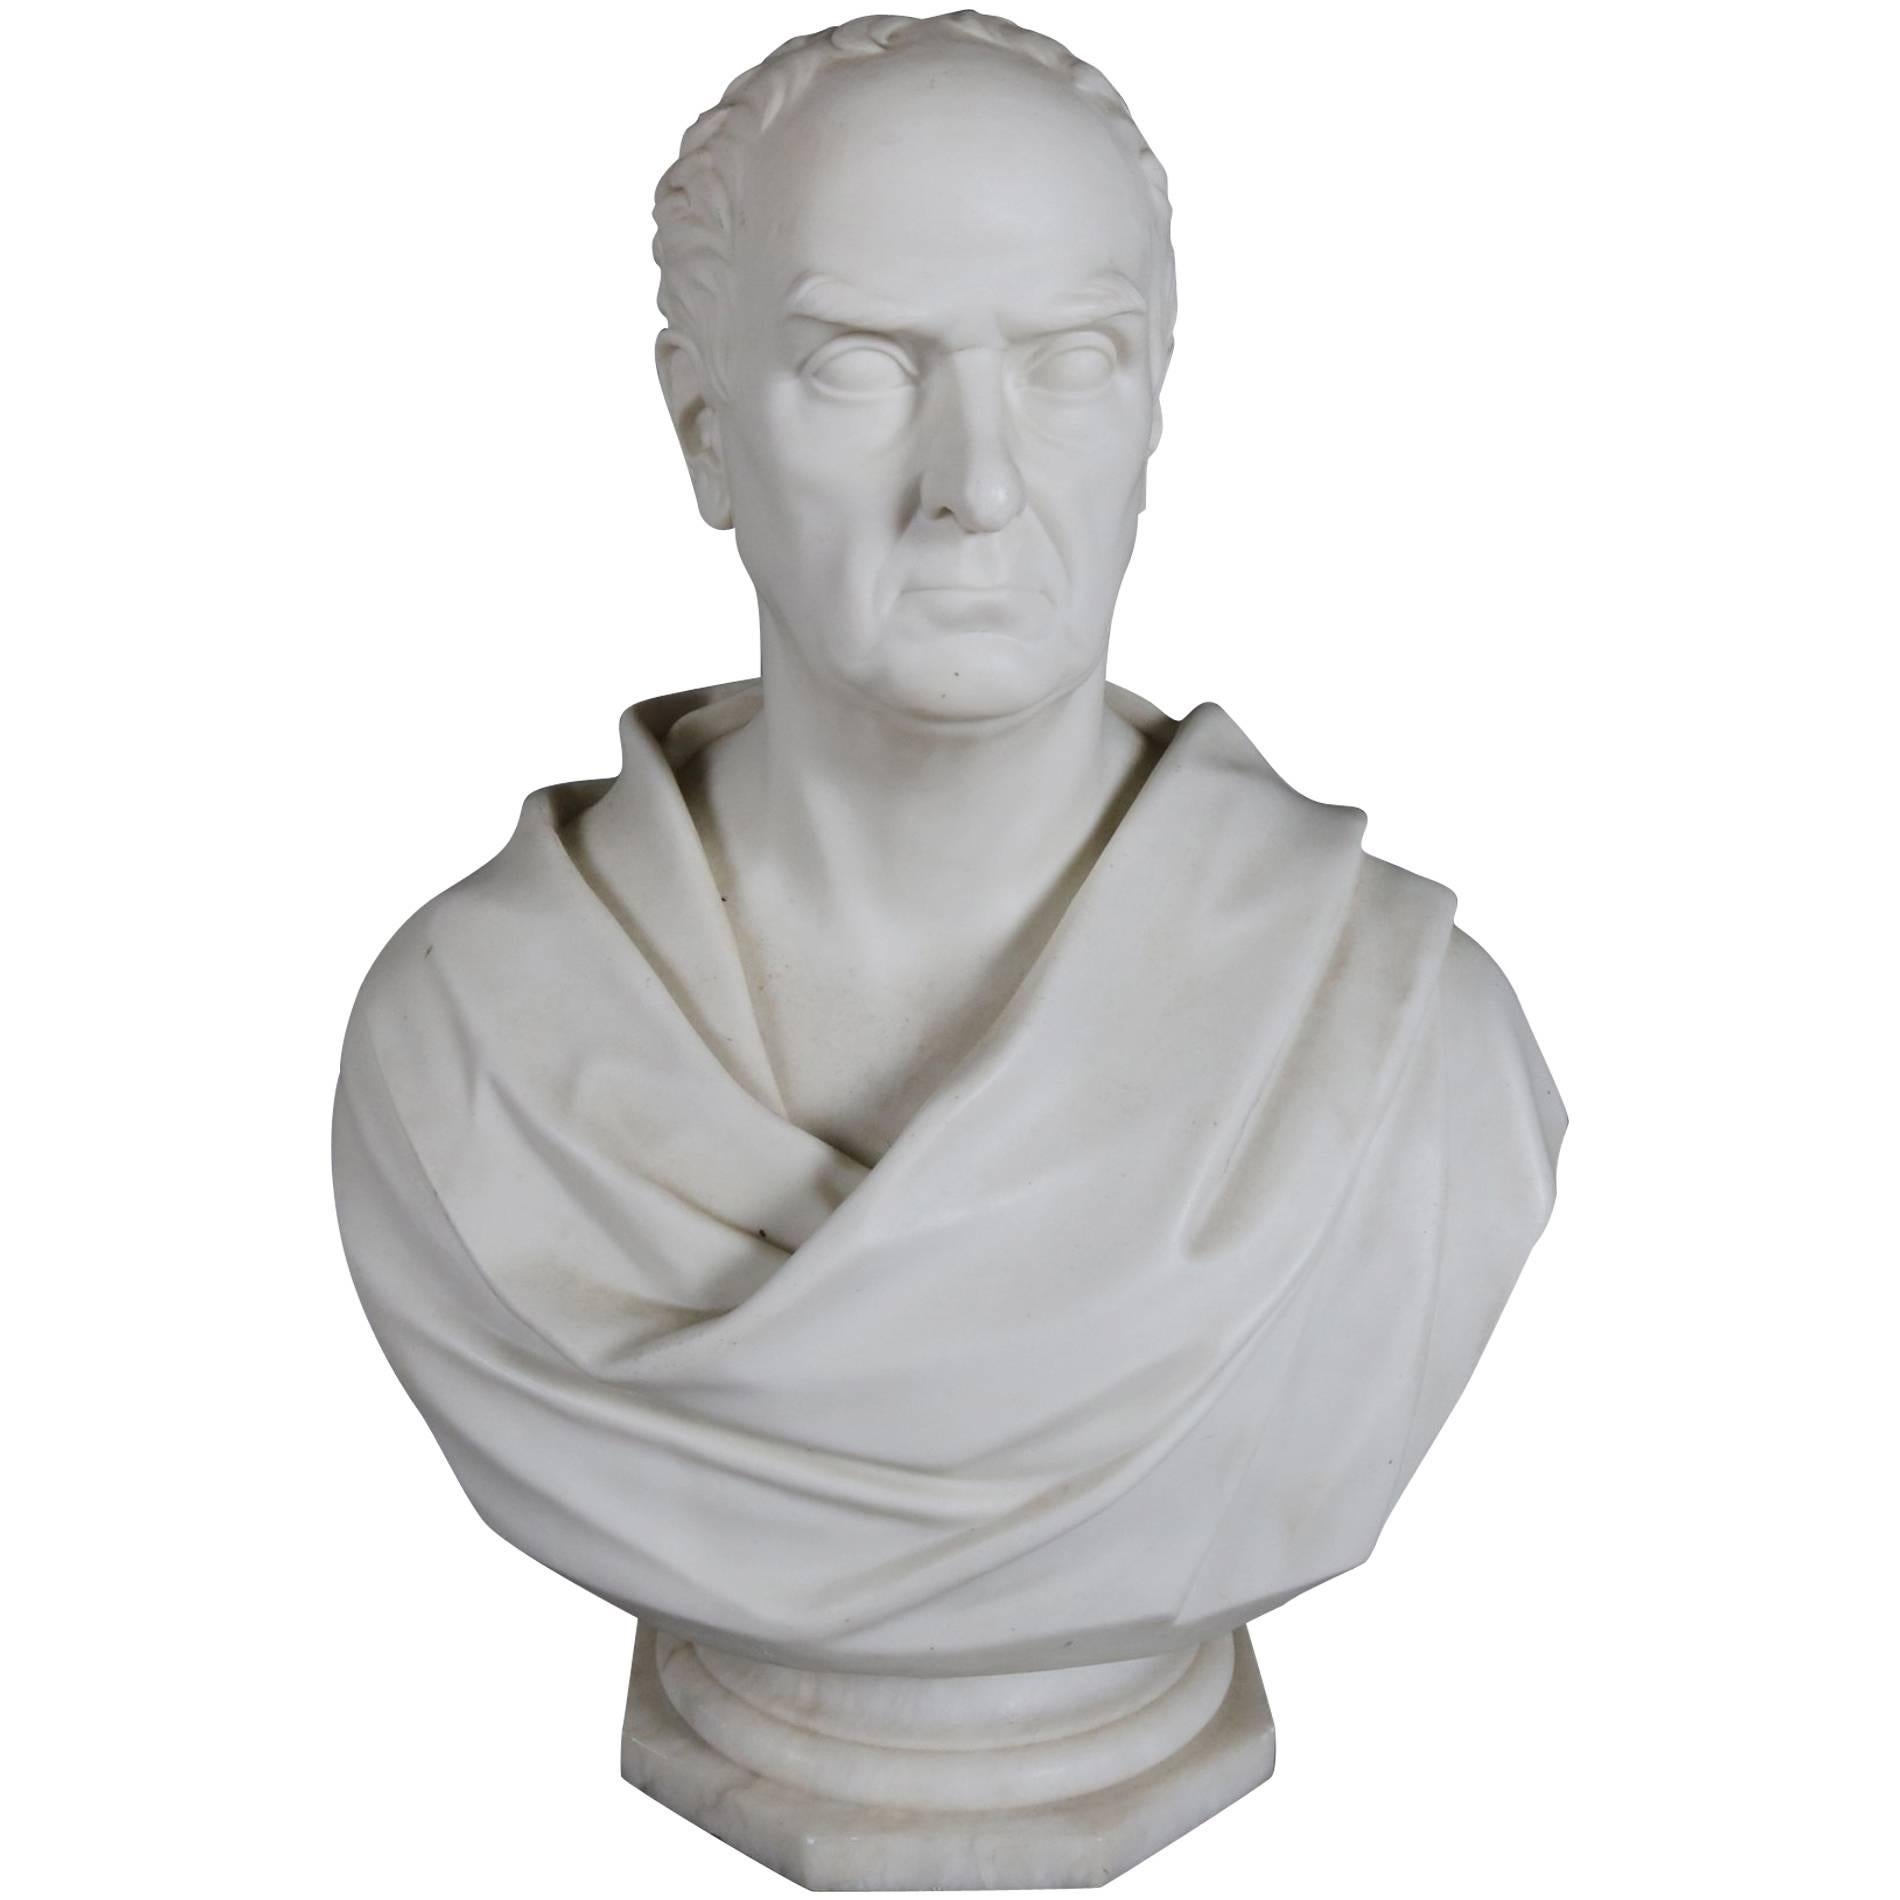 Oversized English Copeland Parian Bust of Daniel Webster by King